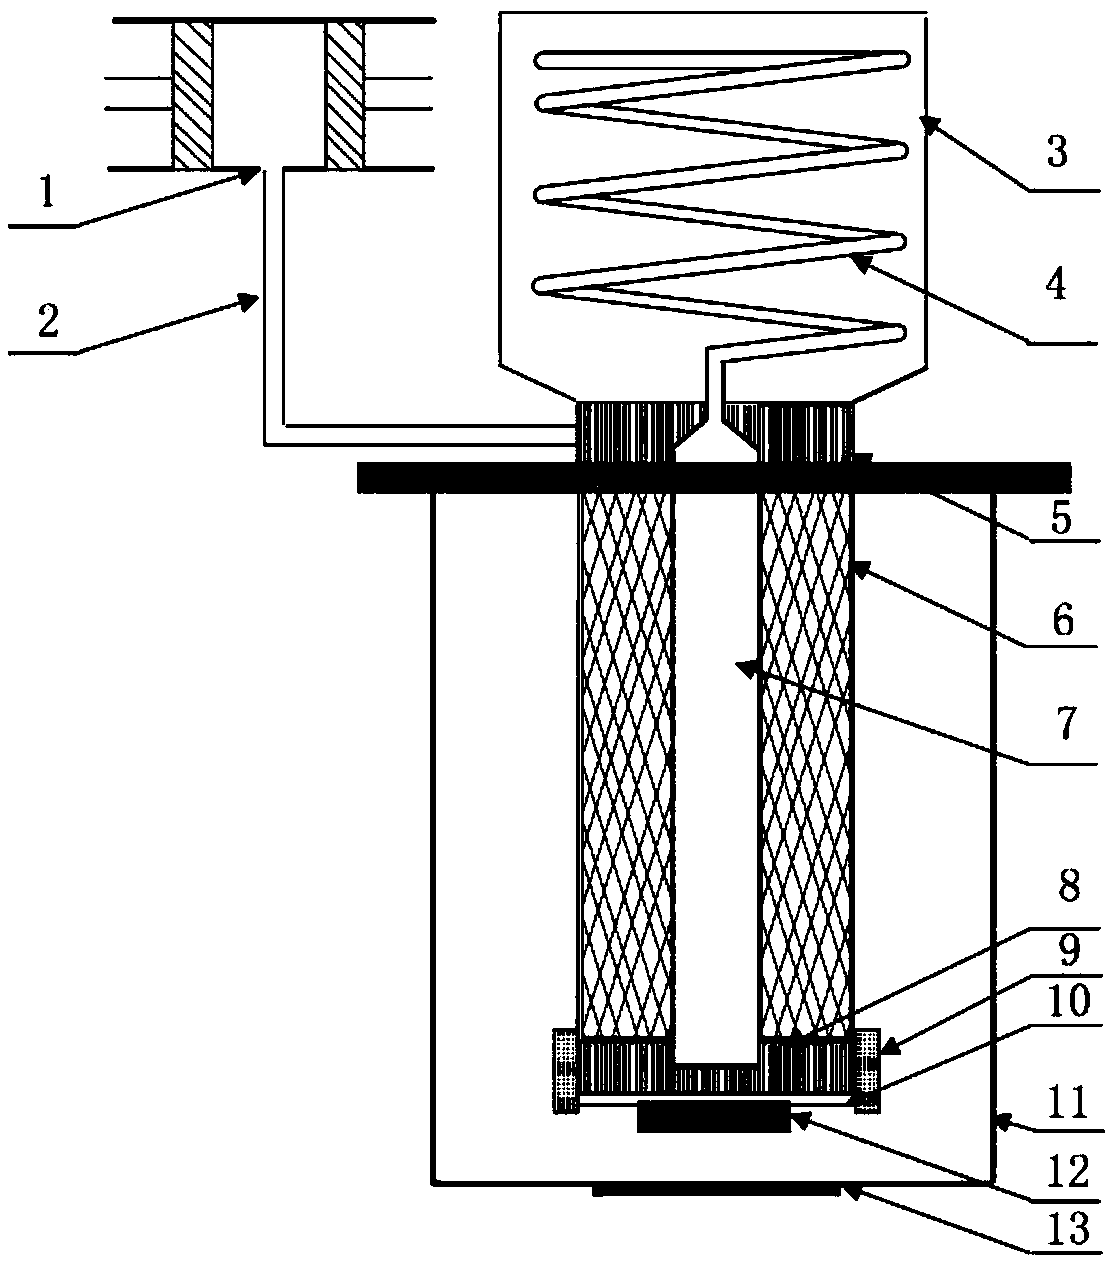 Low temperature refrigeration system provided with adsorption device and used for cooling space probe